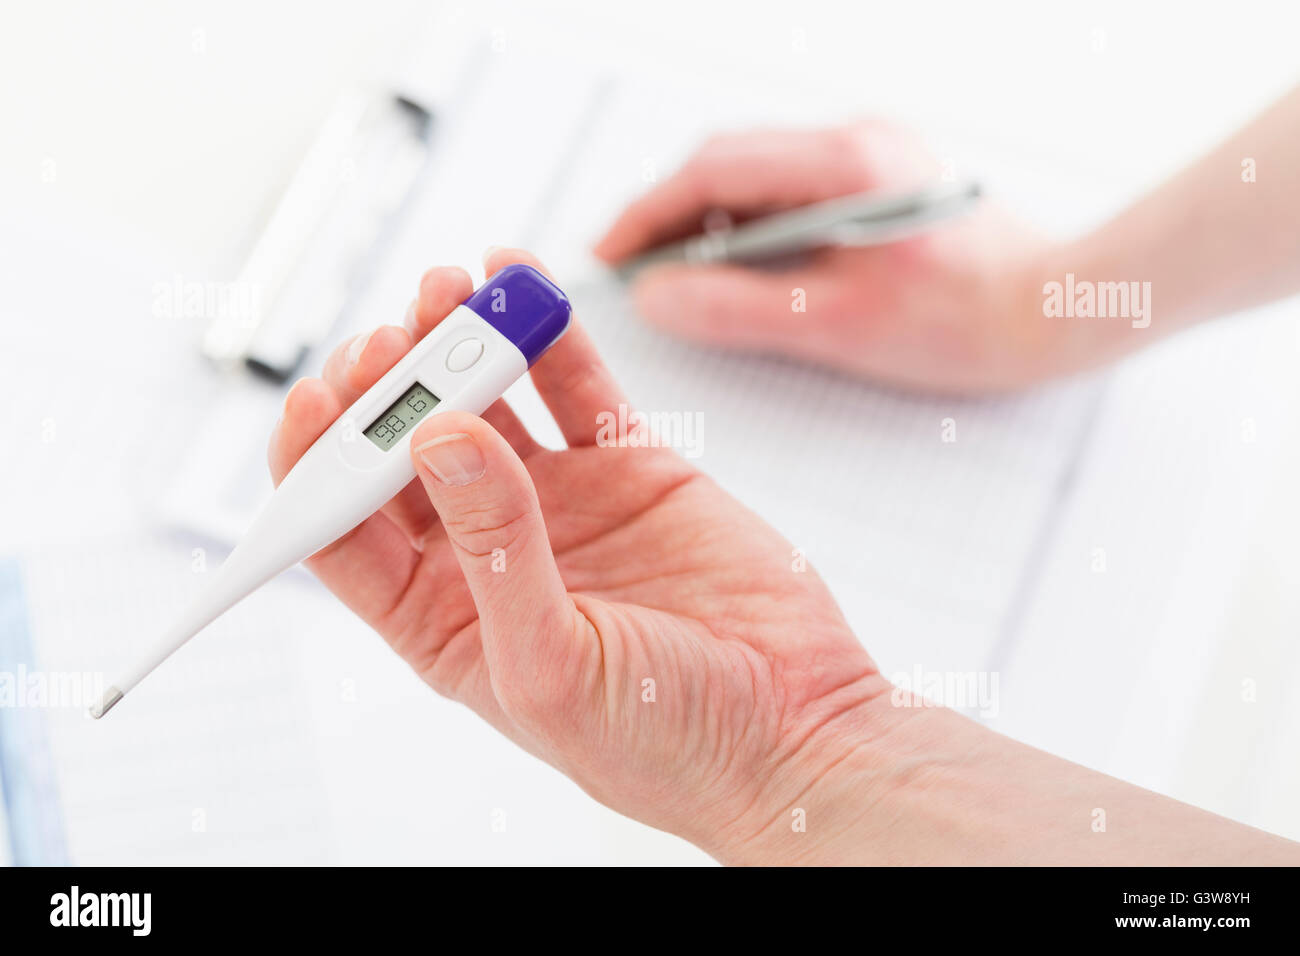 Hand holding thermometer Stock Photo